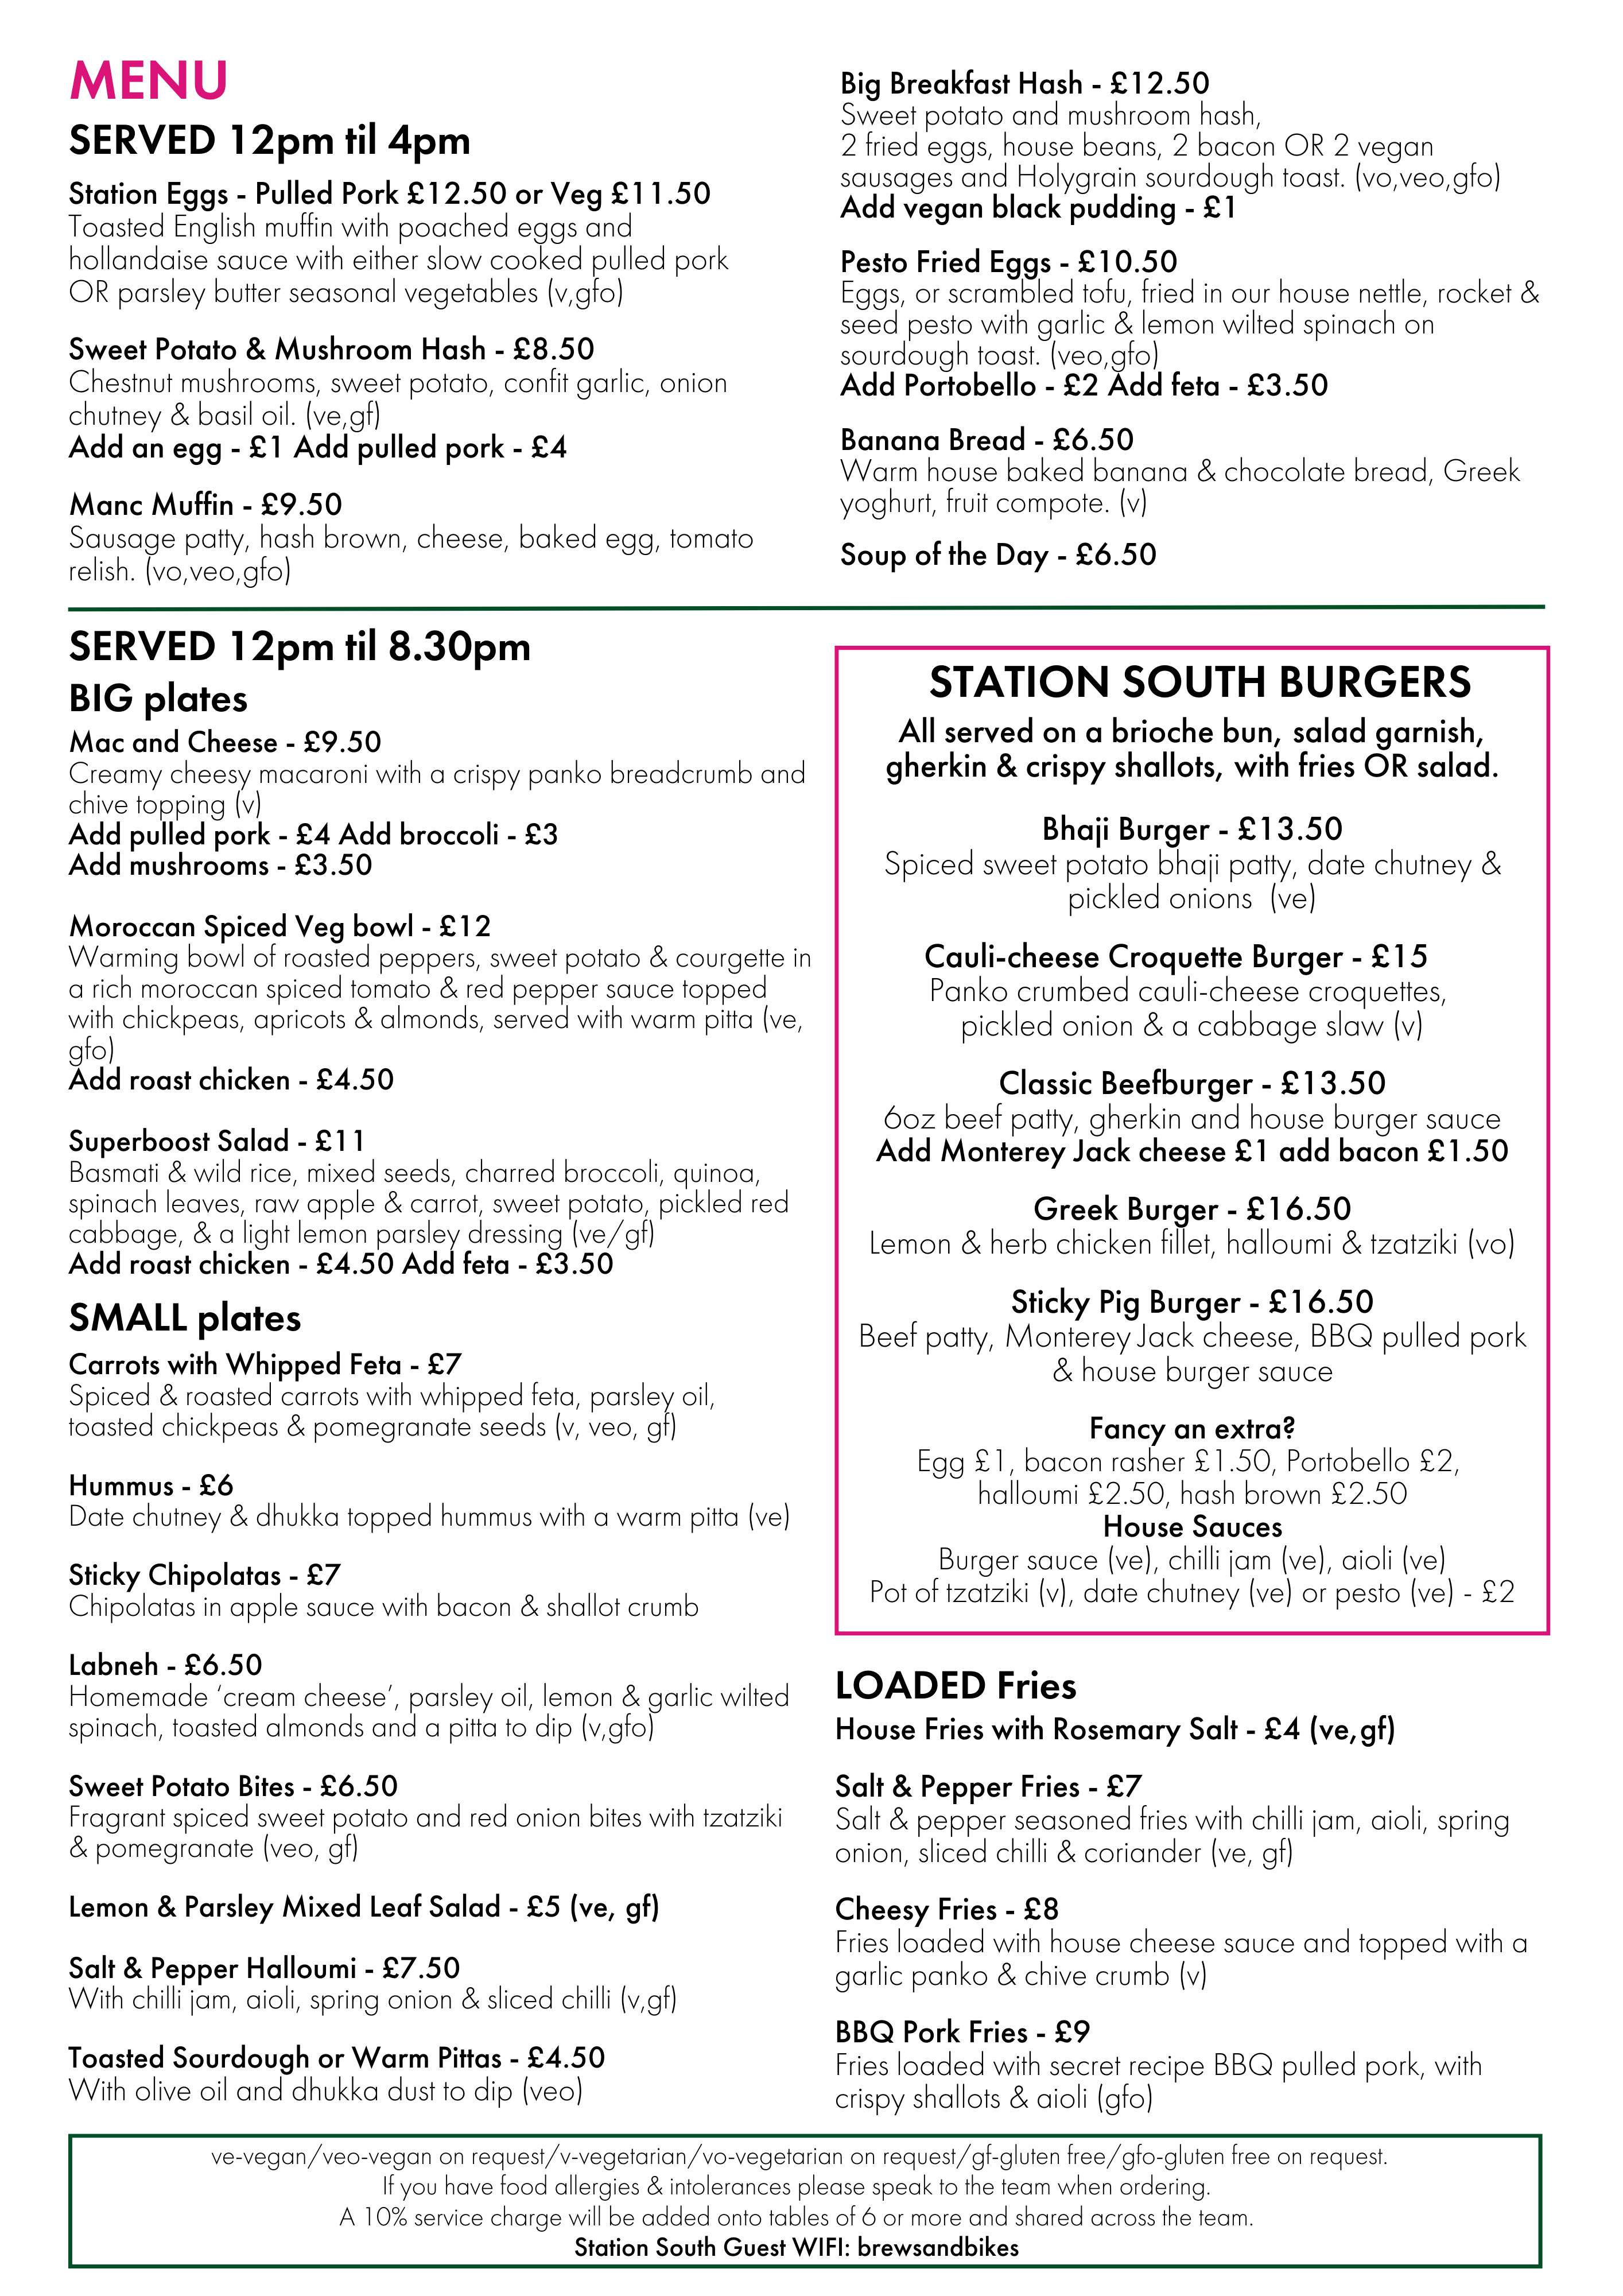 Station South Menu - Evening and Afternoons